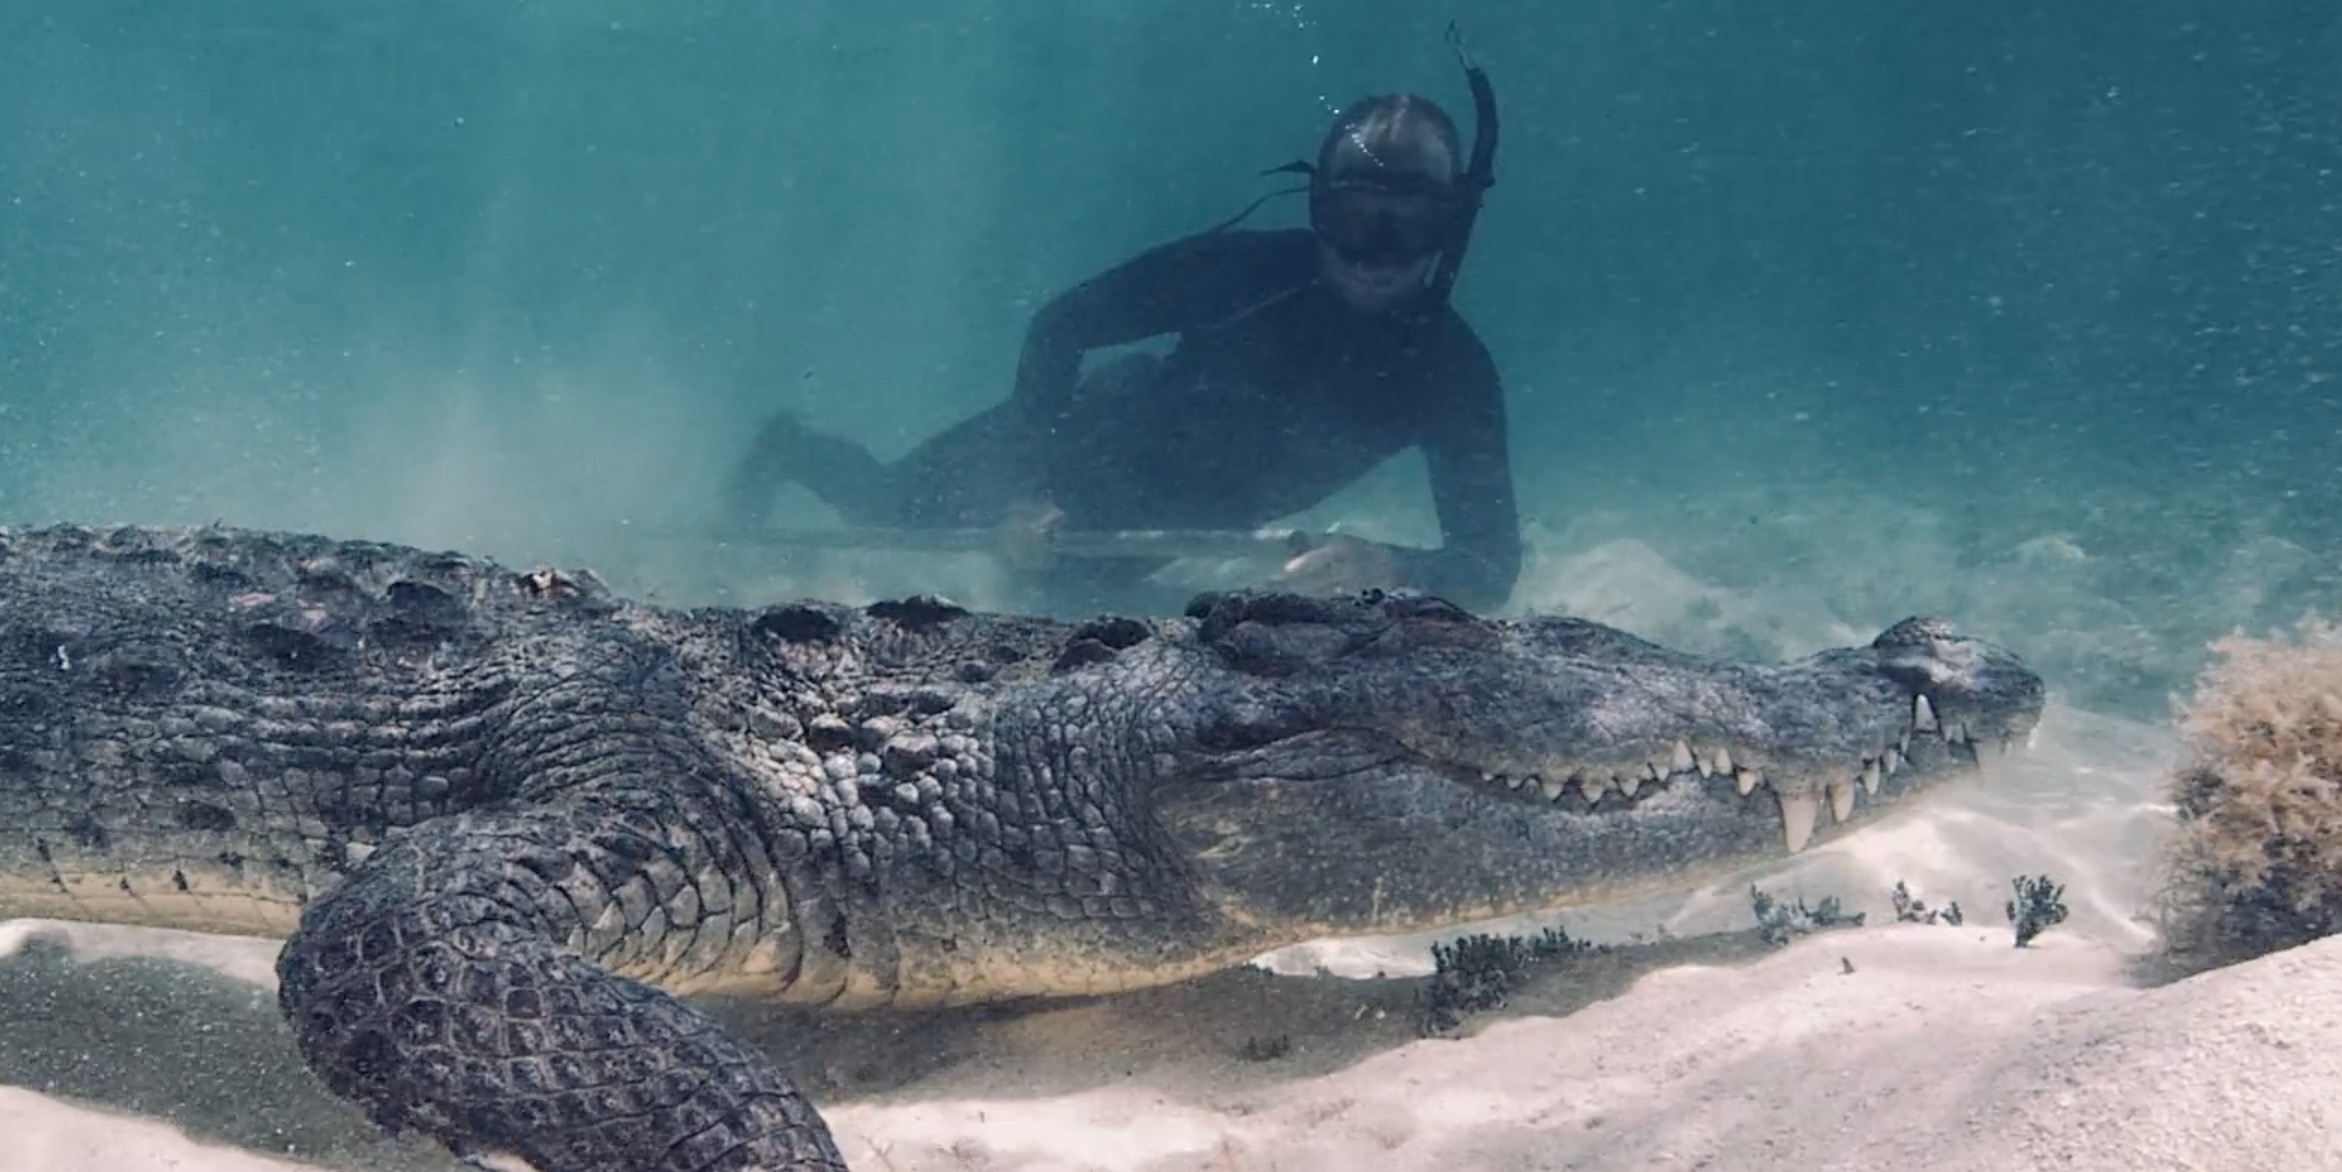 Sentinel of Solitude – Freediving with a crocodile